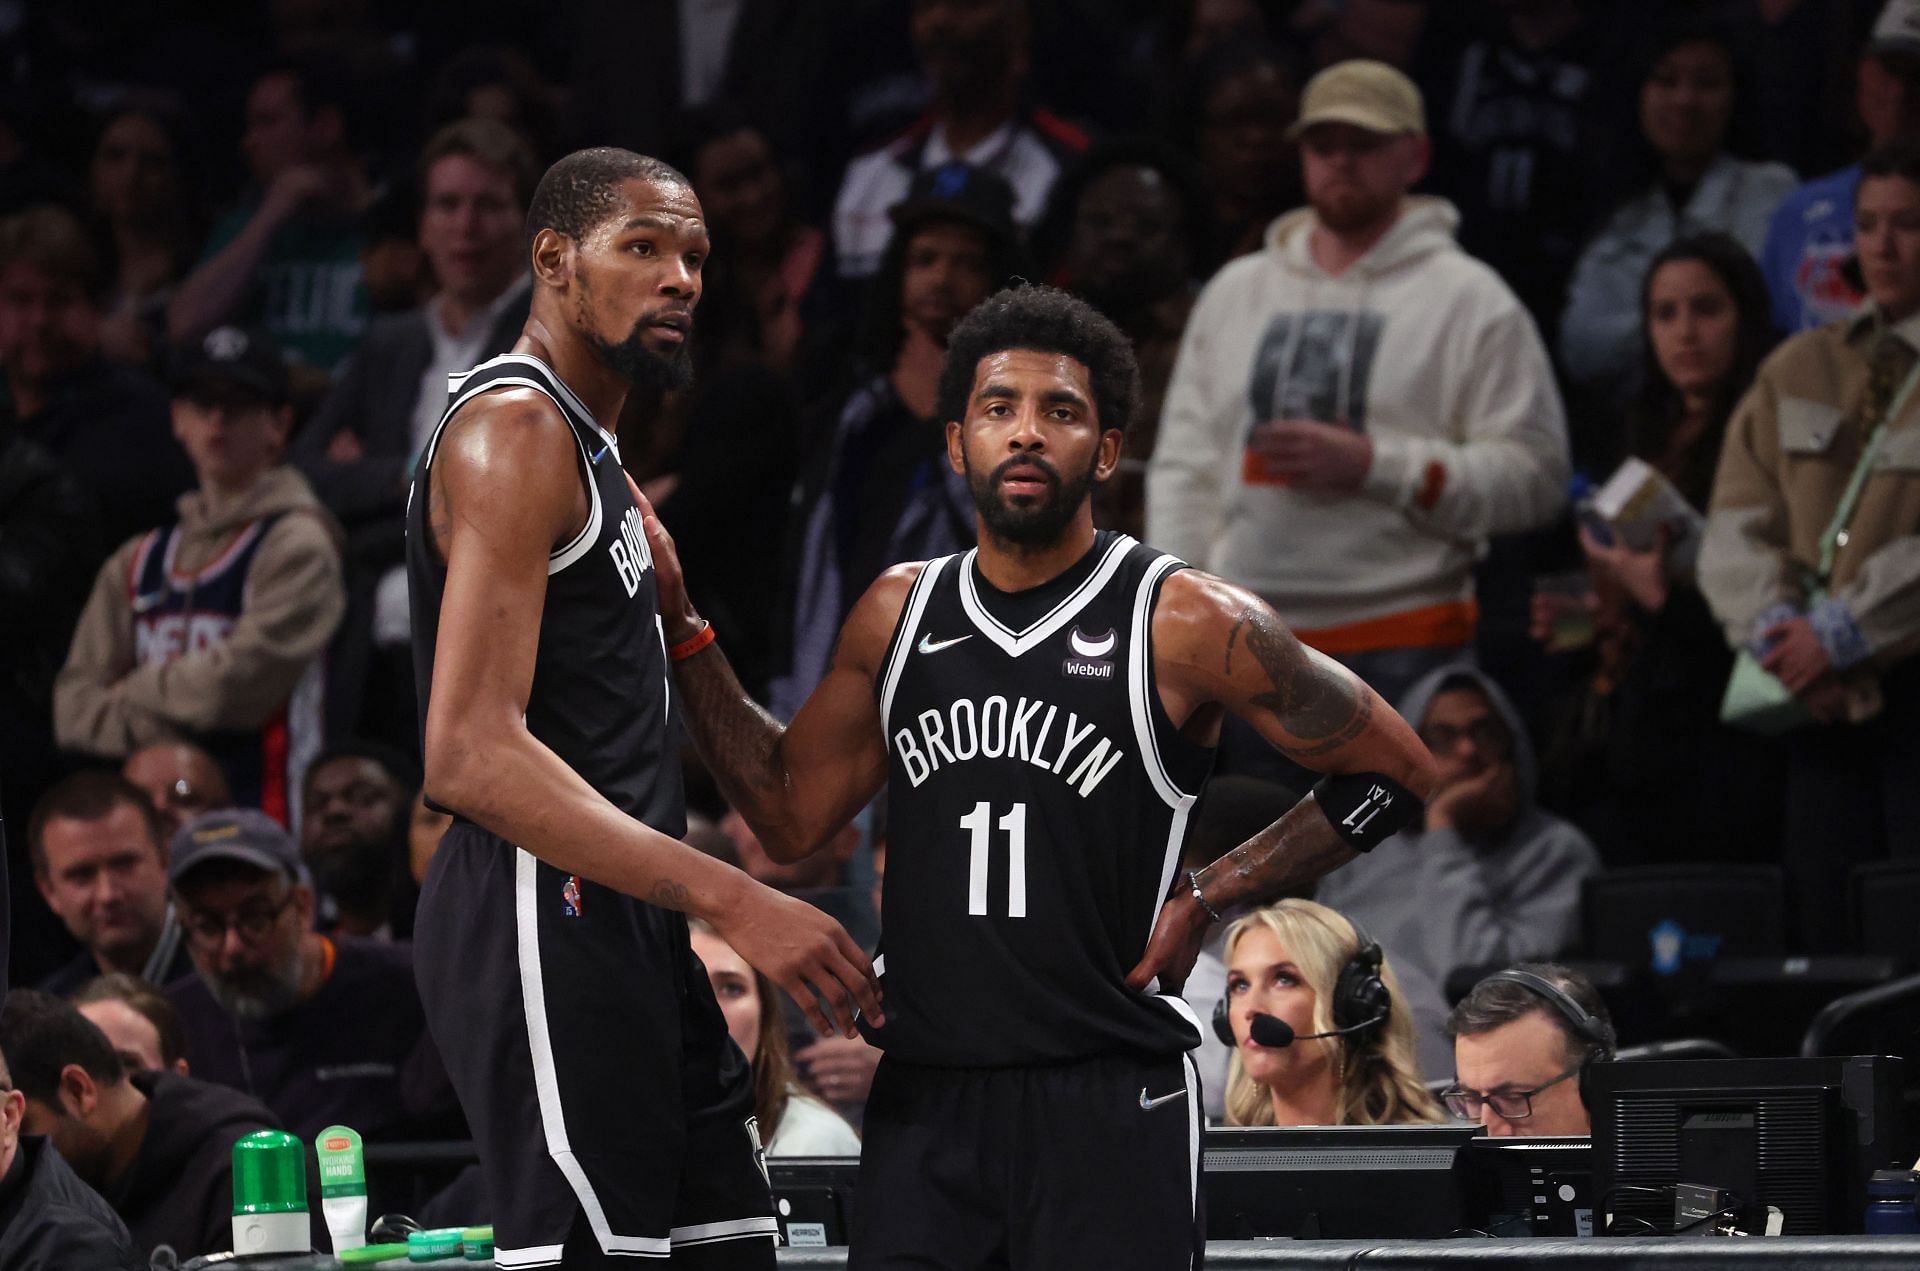 Kevin Durant #7 and Kyrie Irving #11 of the Brooklyn Nets look on in the final seconds of their 109-103 loss against the Boston Celtics during Game Three of the Eastern Conference First Round NBA Playoffs at Barclays Center on April 23, 2022 in New York City